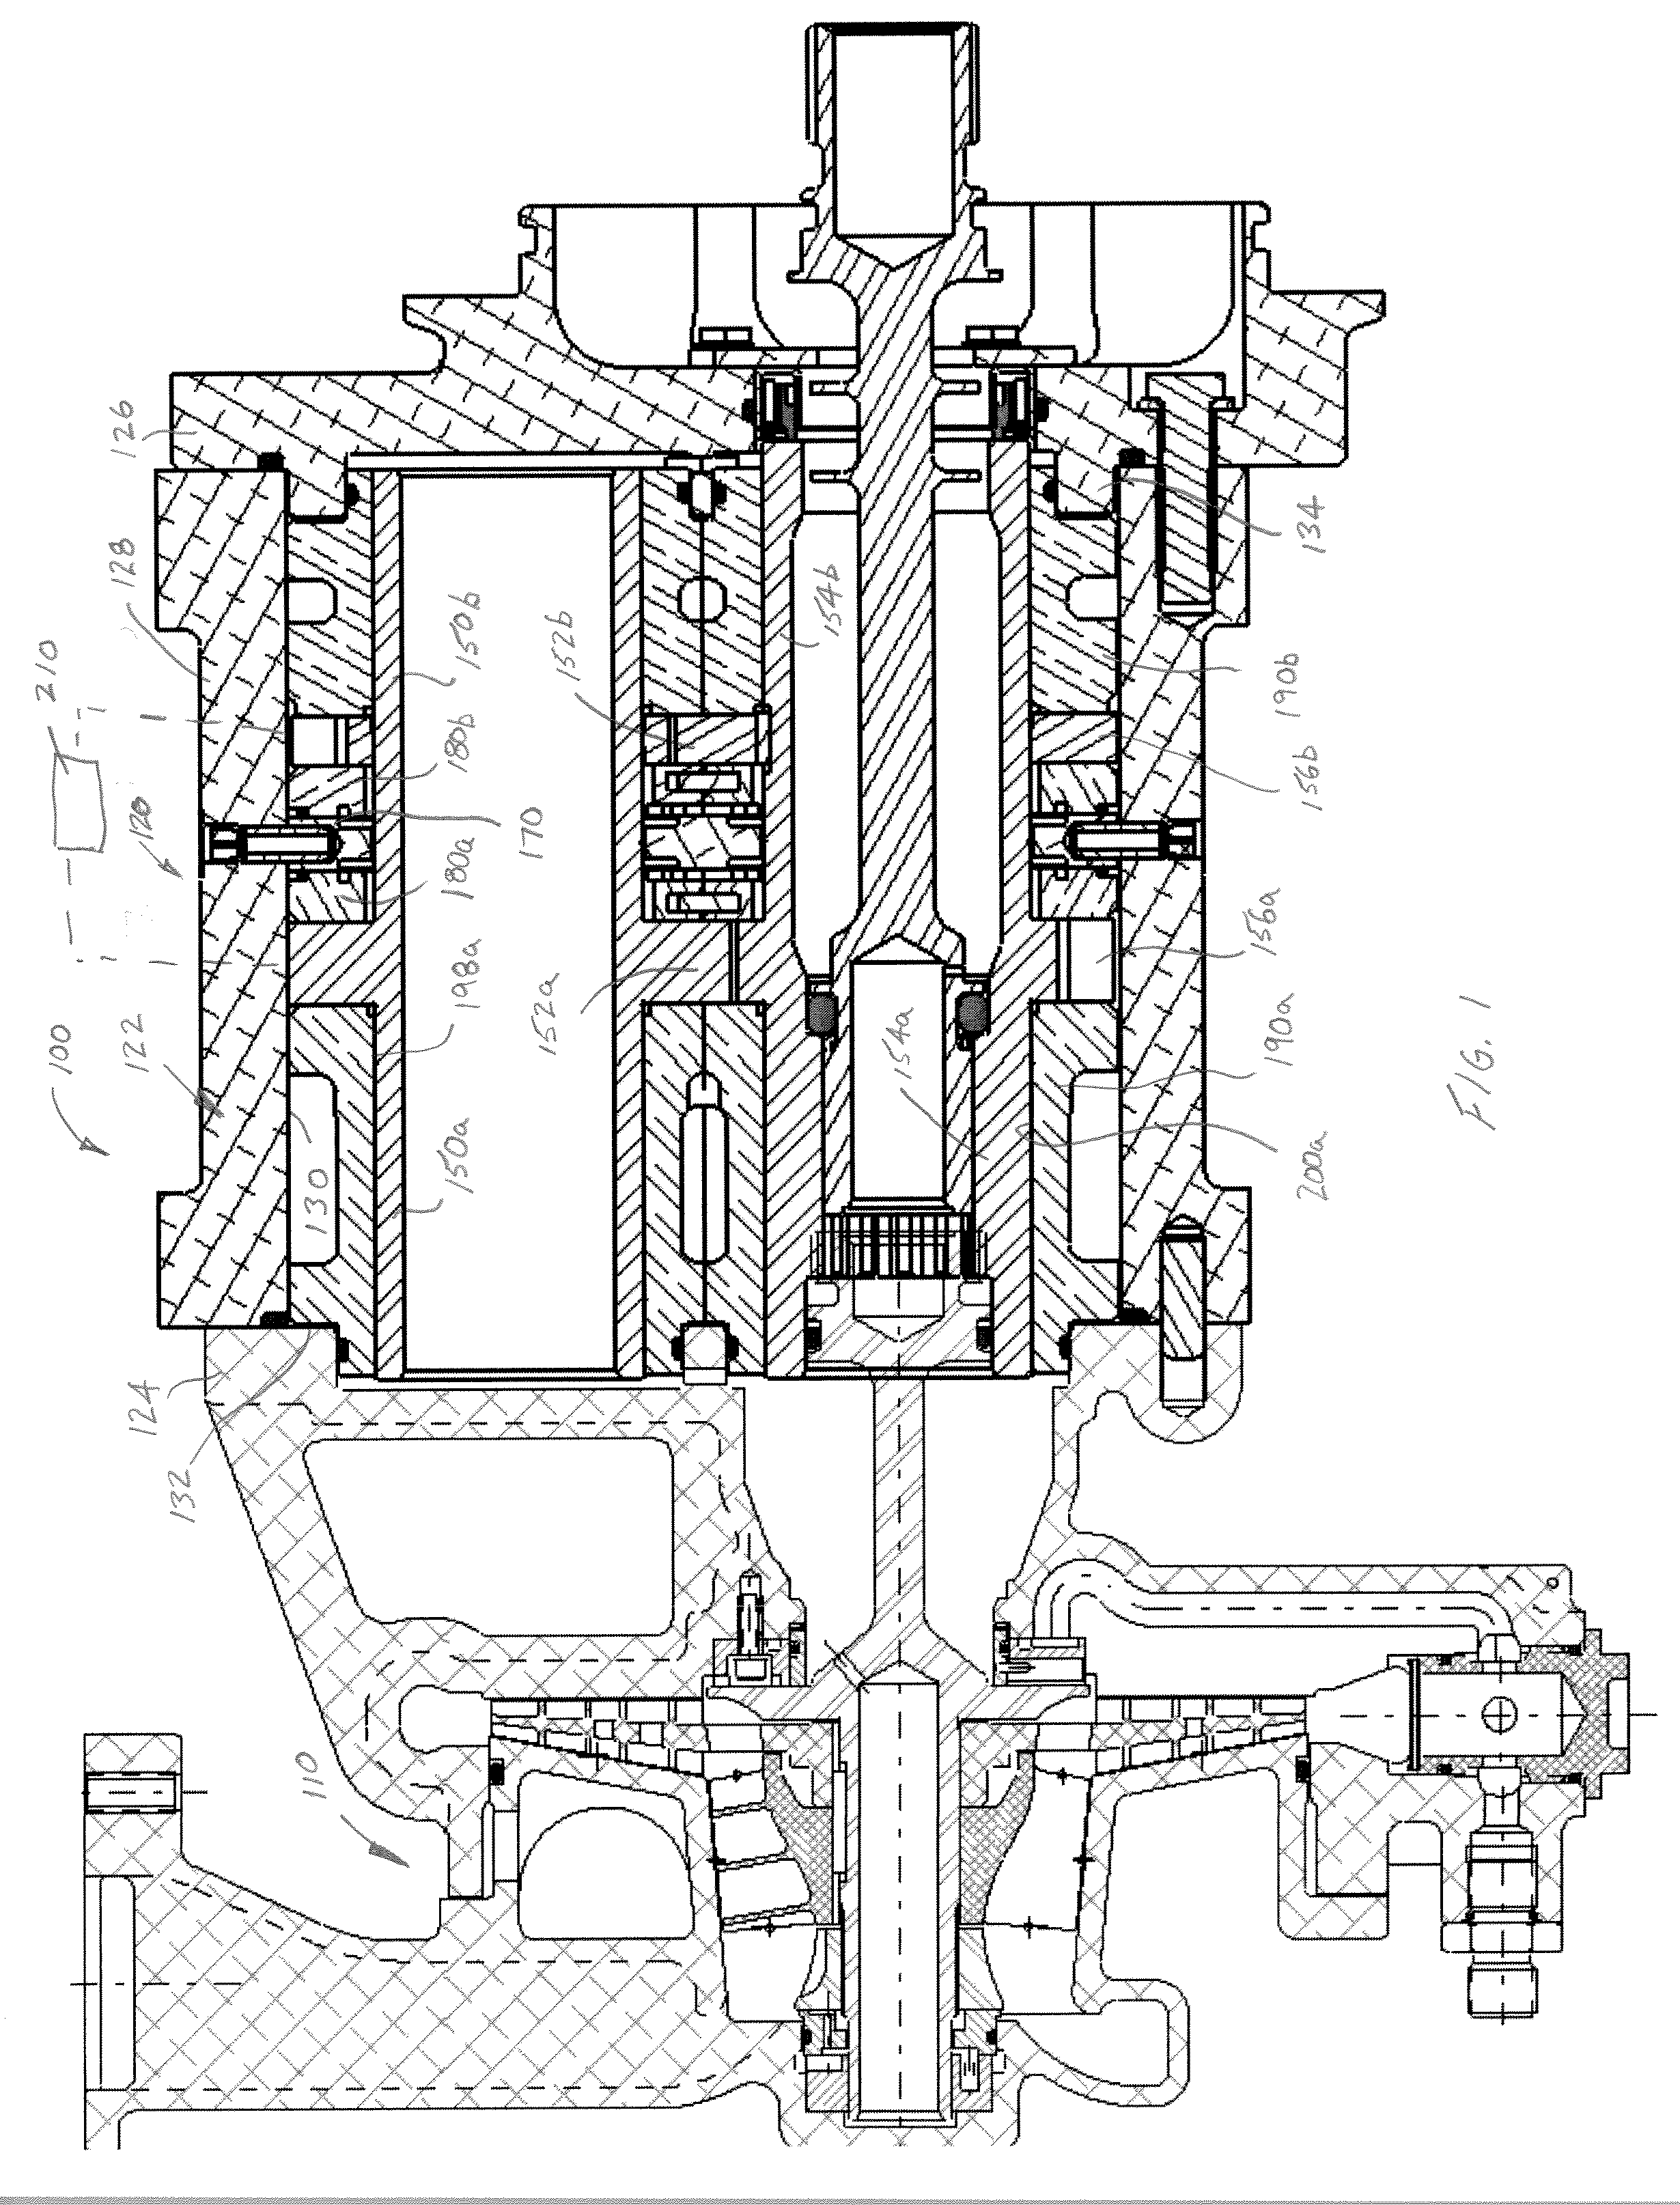 Aircraft main engine fuel pump with multiple gear stages using shared journals